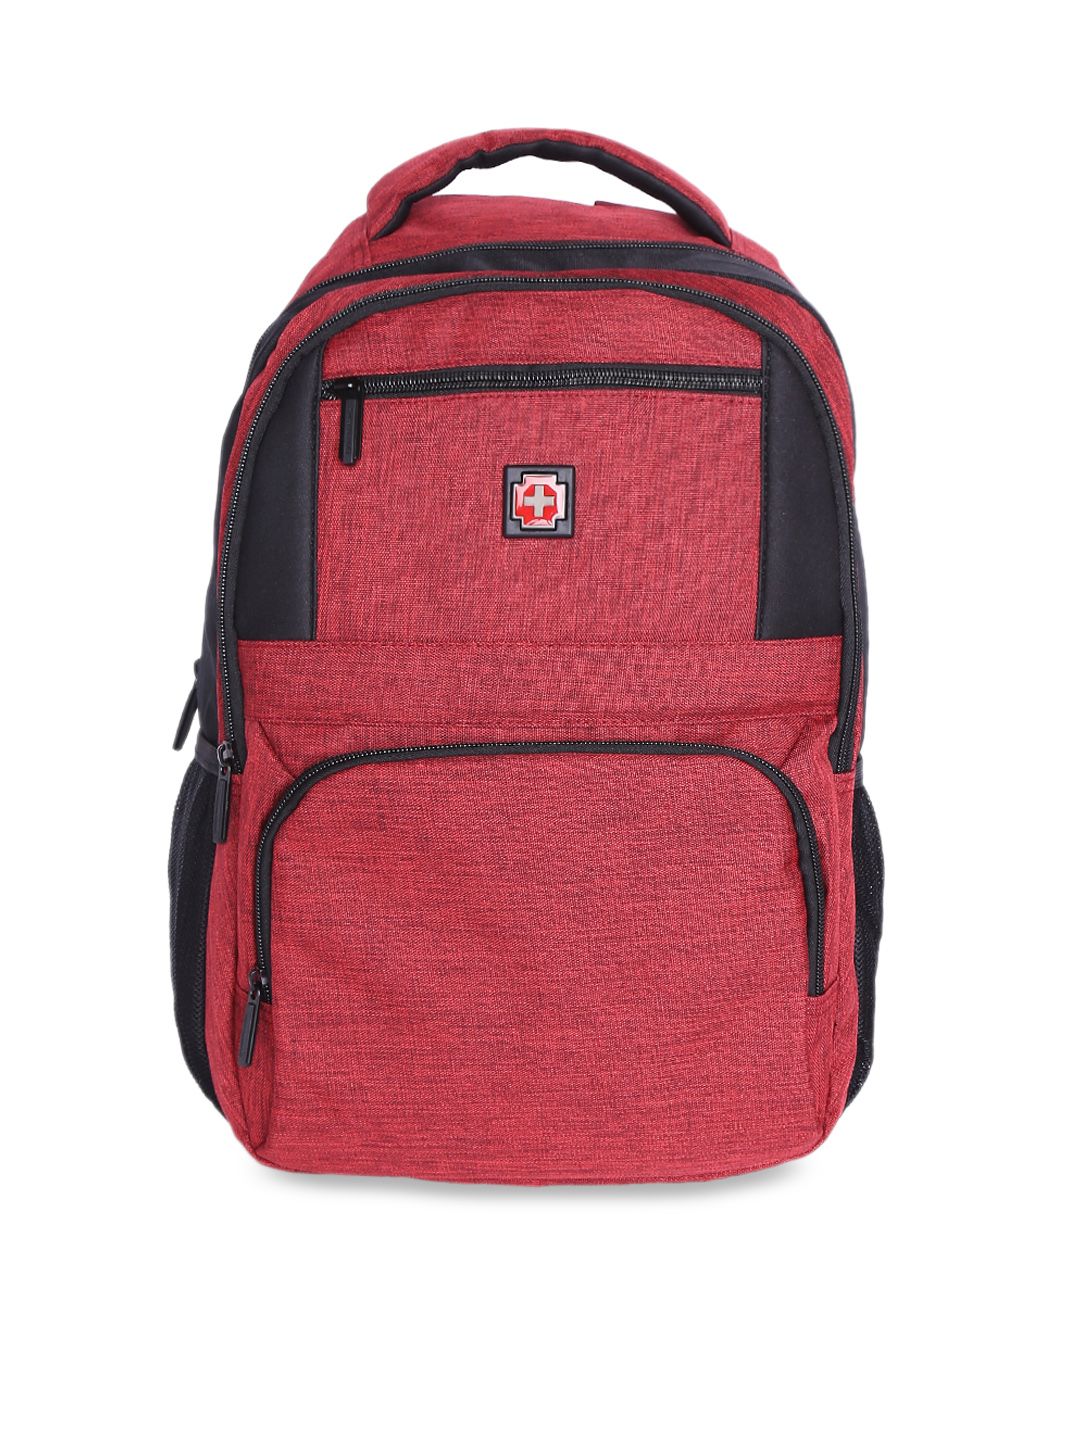 SWISS BRAND Unisex Red Solid Backpack Price in India